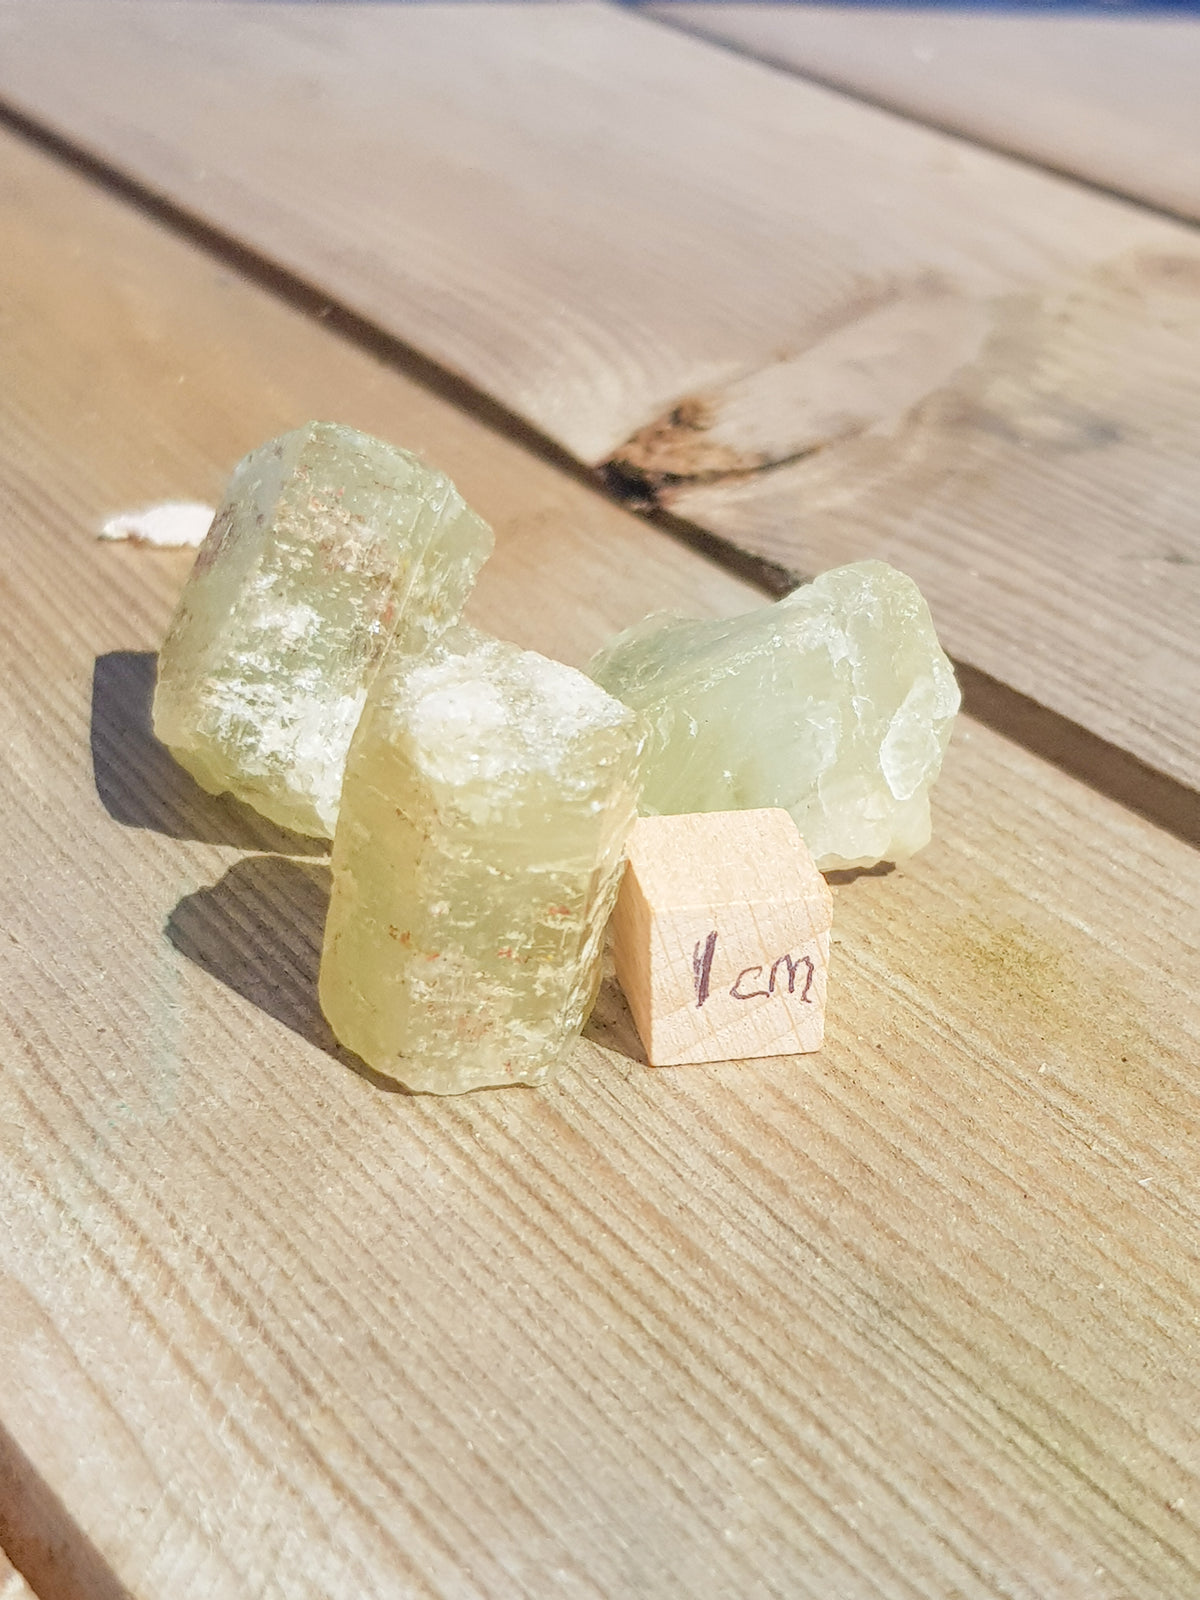 three beryl crystals. They are hexagonal. they are yellow/green. They are next to a ruler for scale. They are about 1.2 cm tall and 1cm wide.